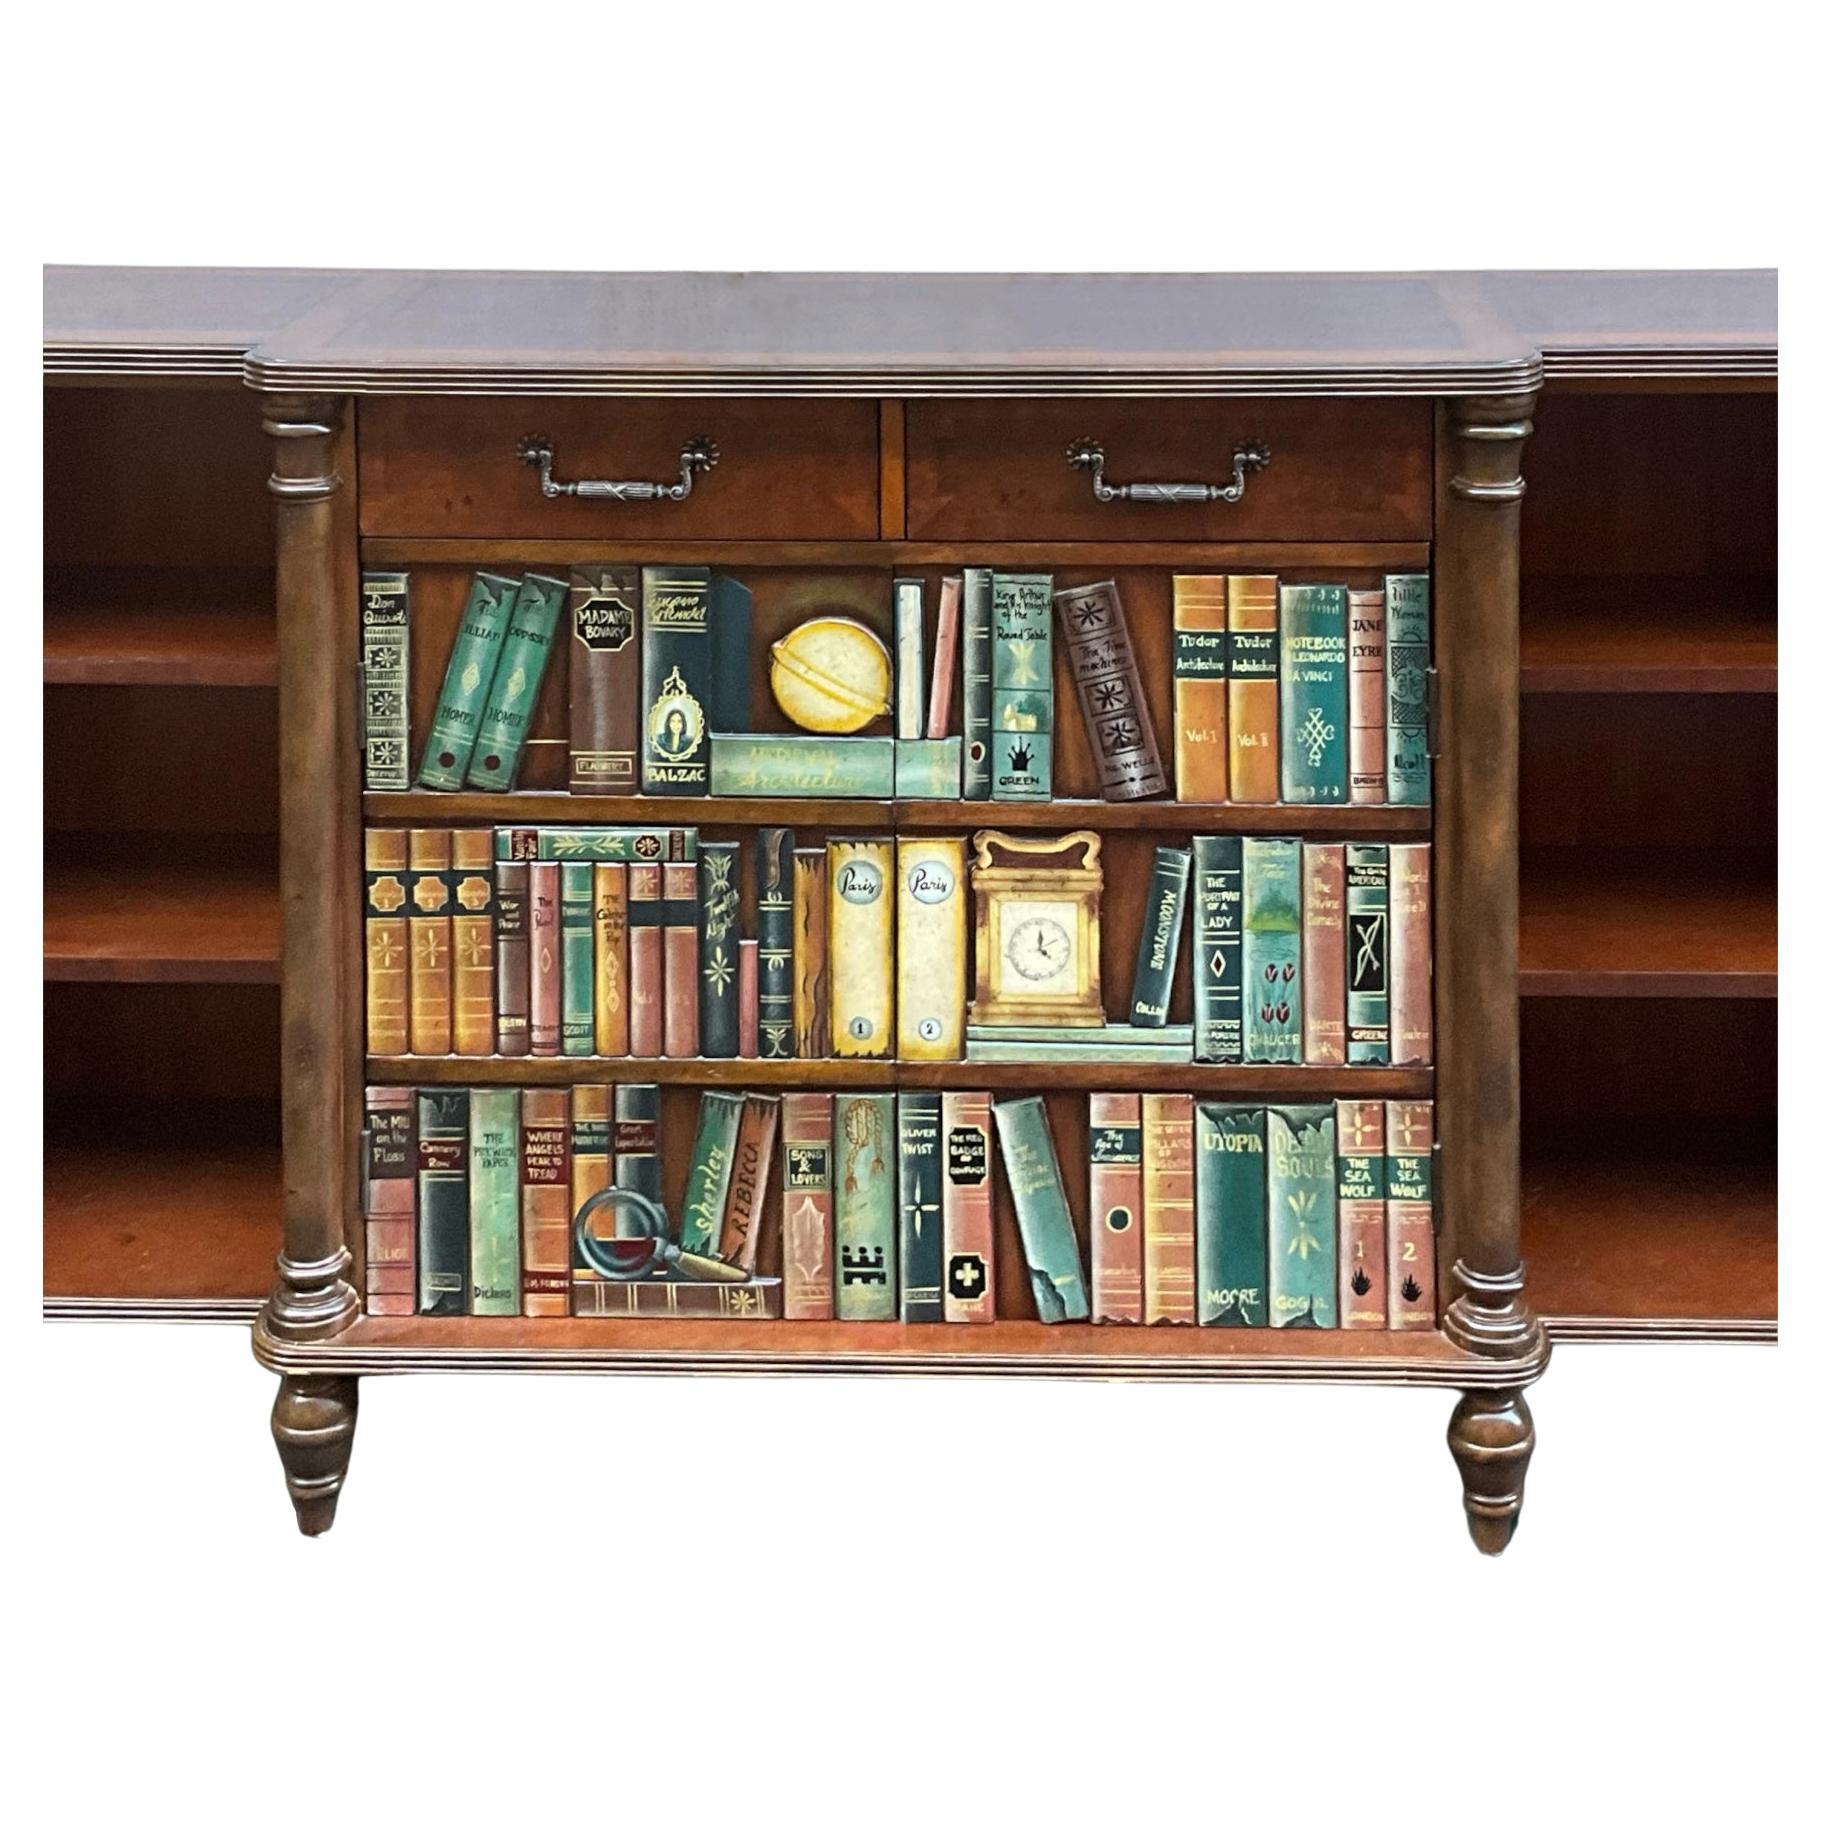 This is a striking Maitland-Smith trompe-l’oeil Edwardian style book form cabinet with leather top. The faux book front opens to additional storage. It is in very good condition and is marked. 

My shipping is for the Continental US only and can run